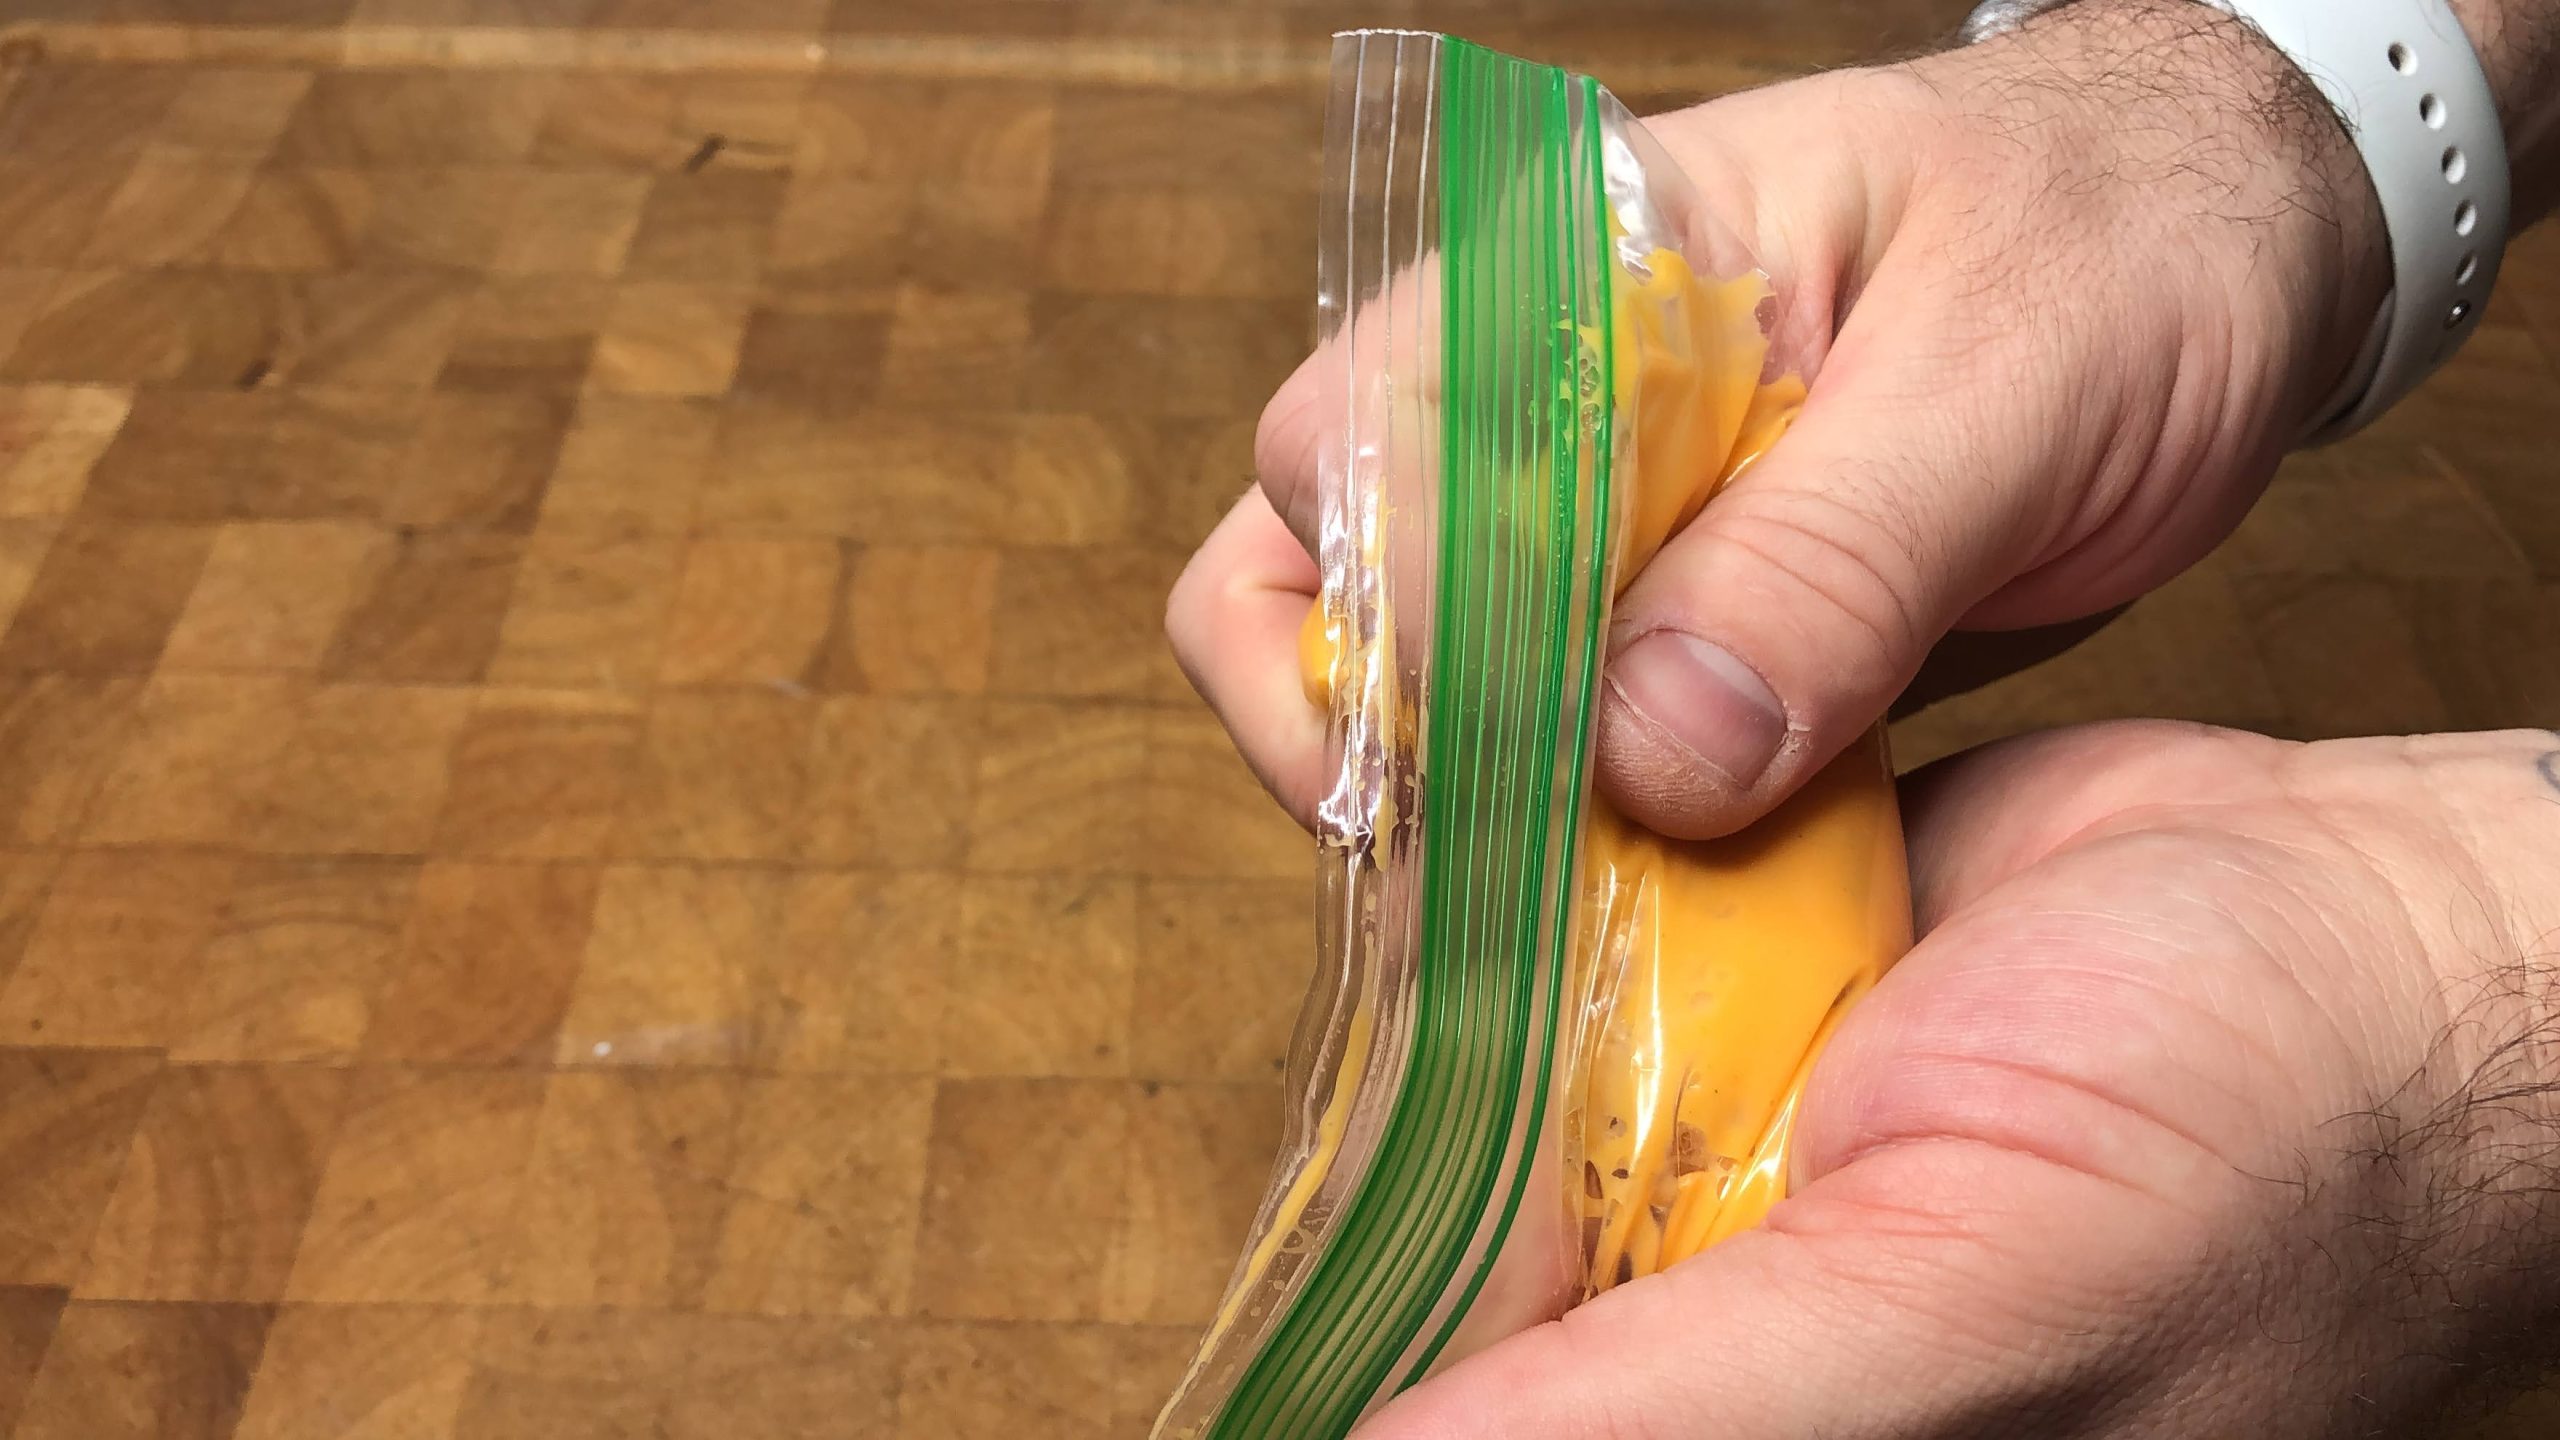 squeezing air out of a freezer bag filled with nacho cheese